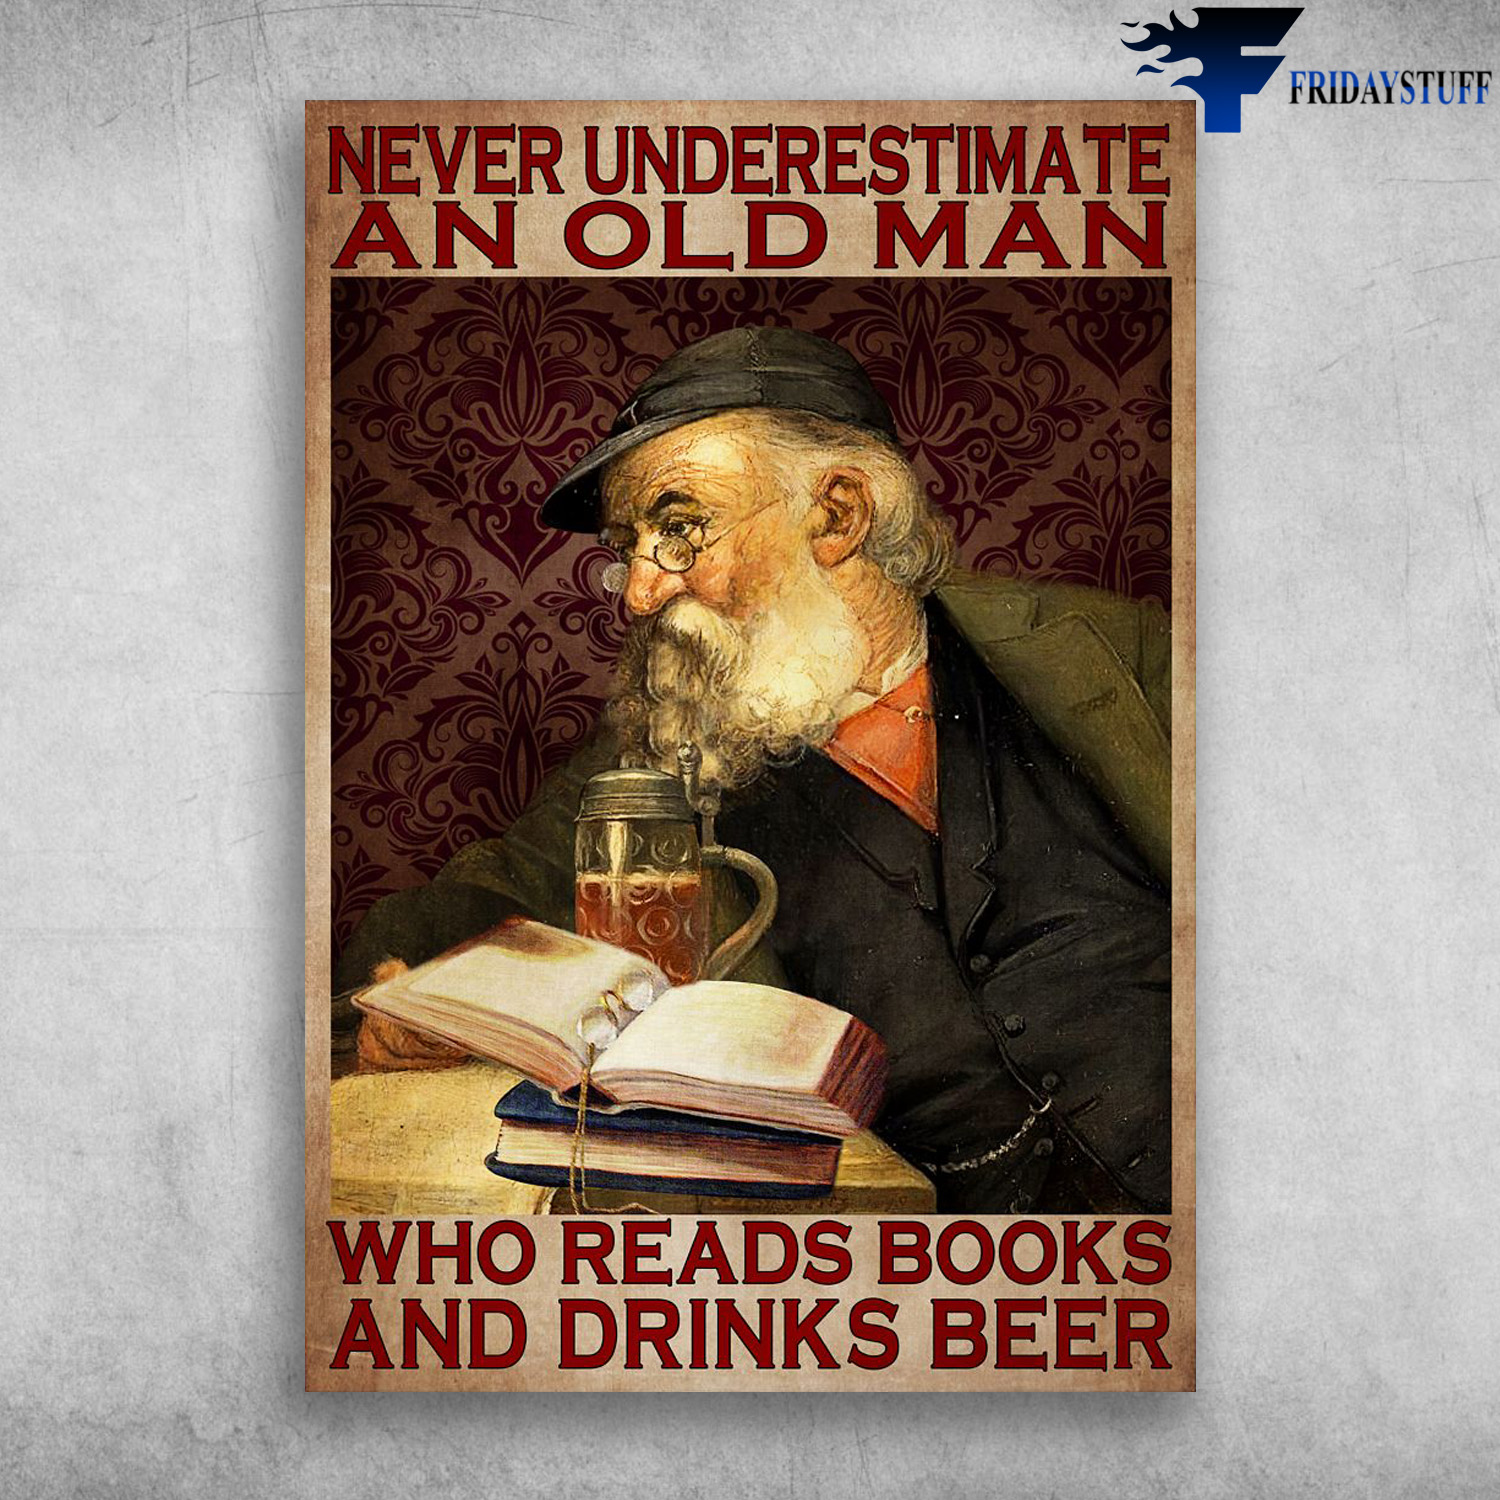 Old Man Drinks Beer, Book - Never Underestimate An Old Man, Who Reads Boosk And Drinks Beer